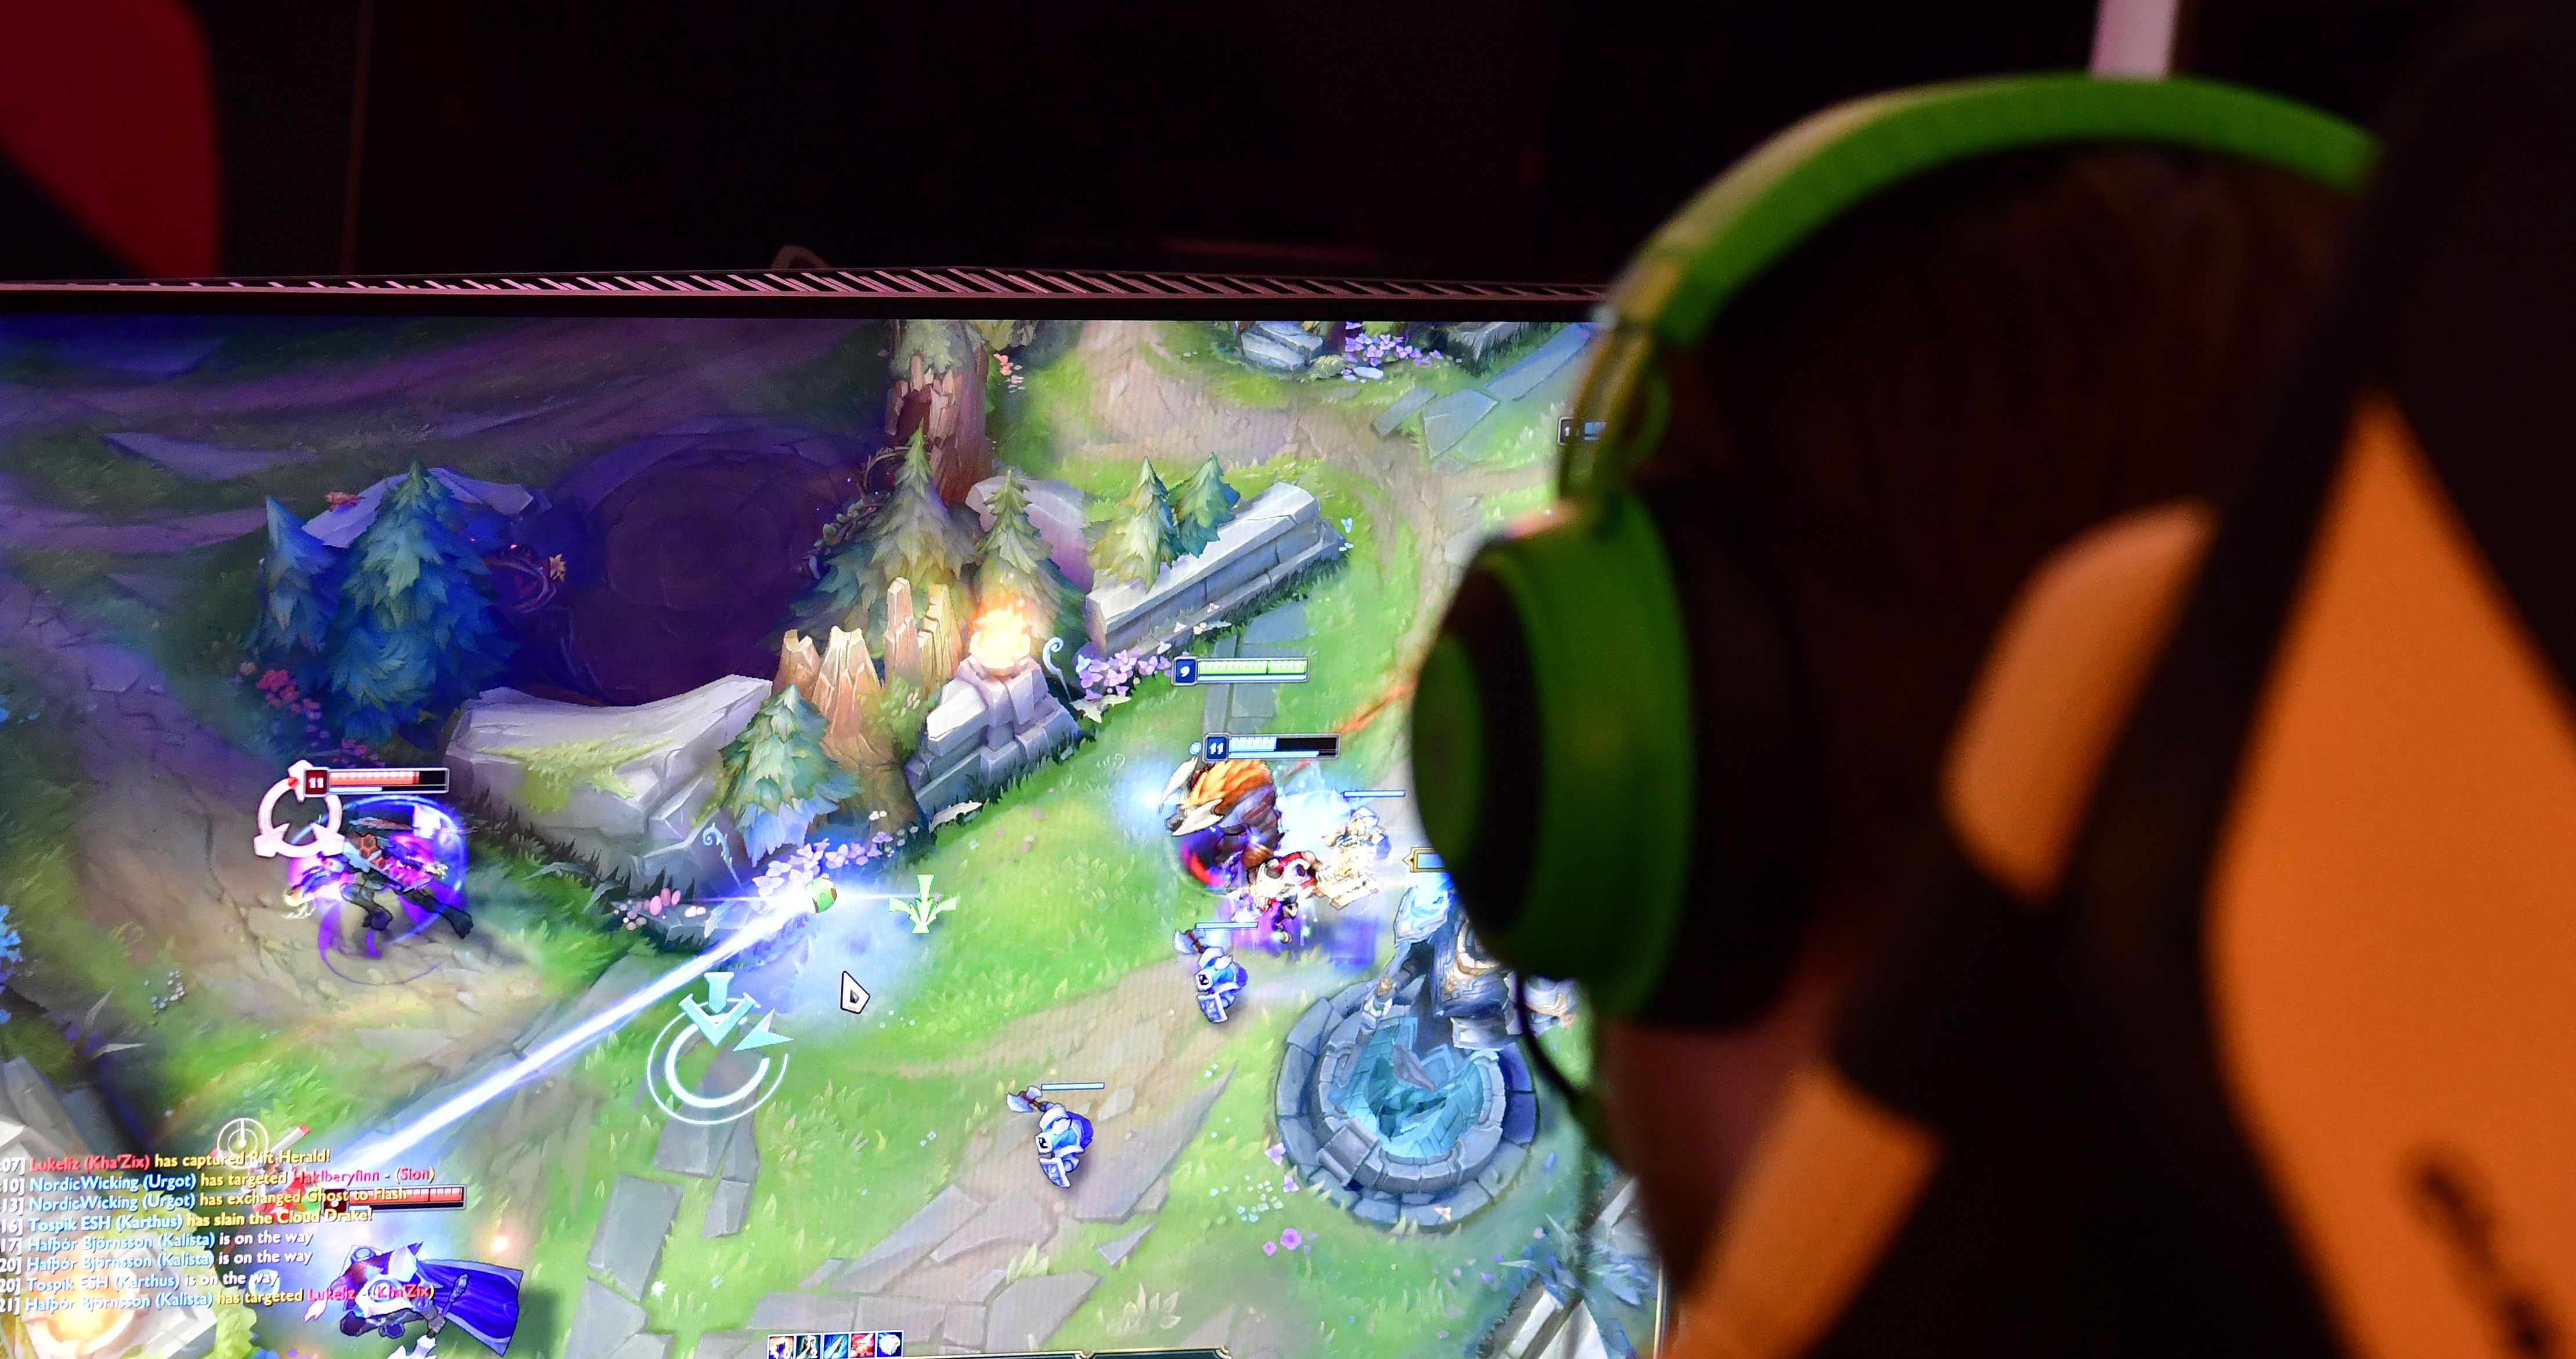 League of Legends source code exposed in Riot cyberattack